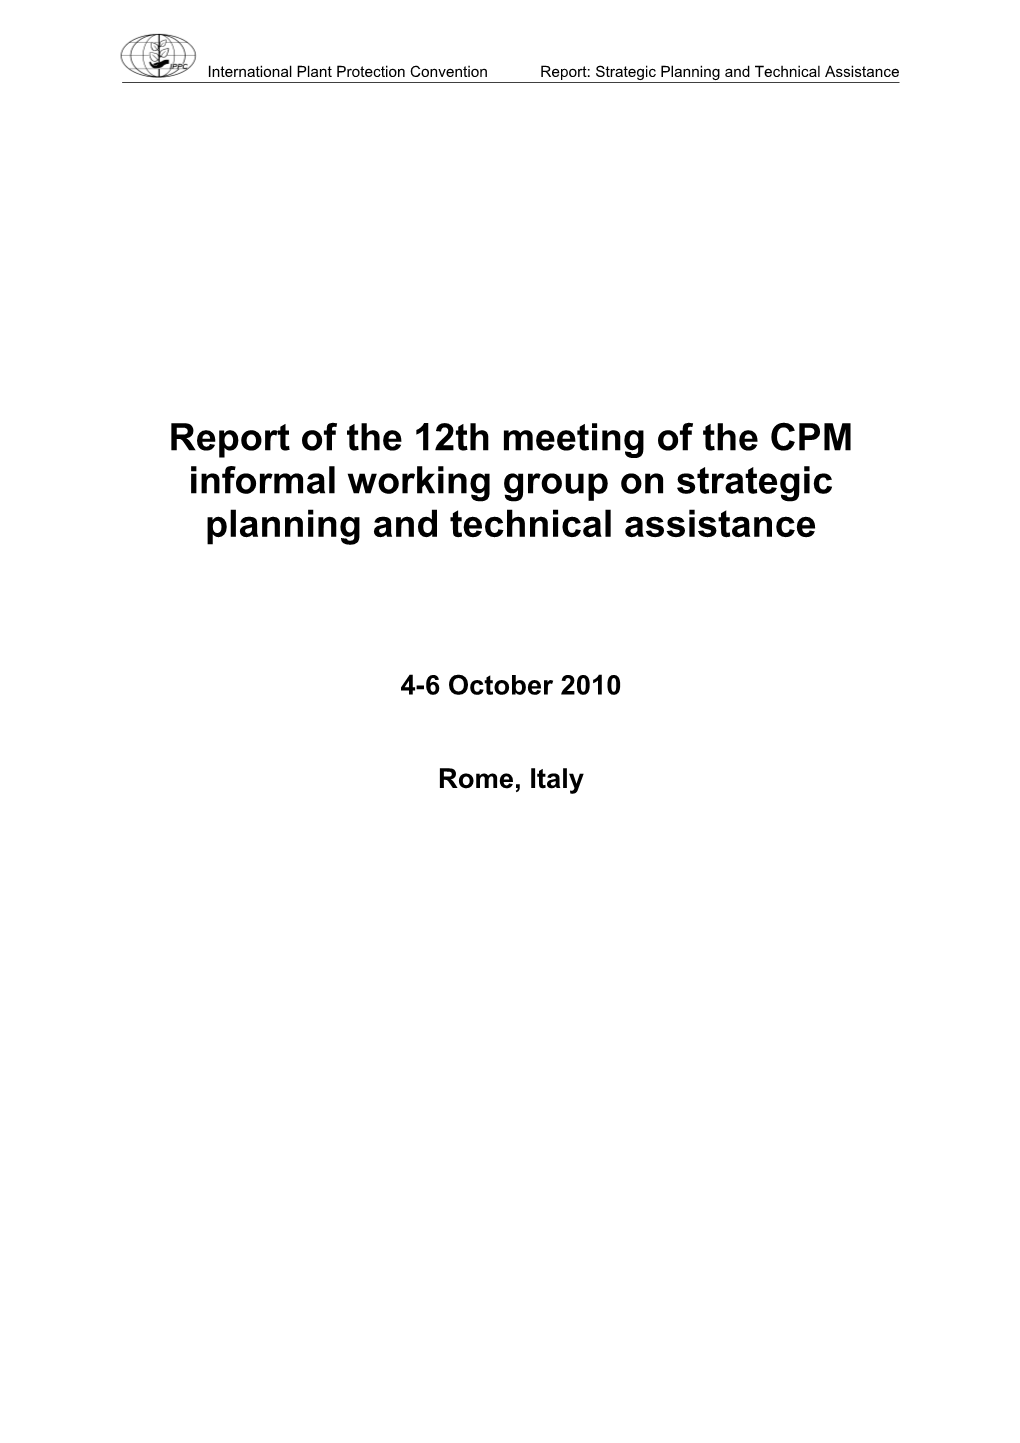 Report of the 12Th Meeting of the CPM Informal Working Group on Strategic Planning And